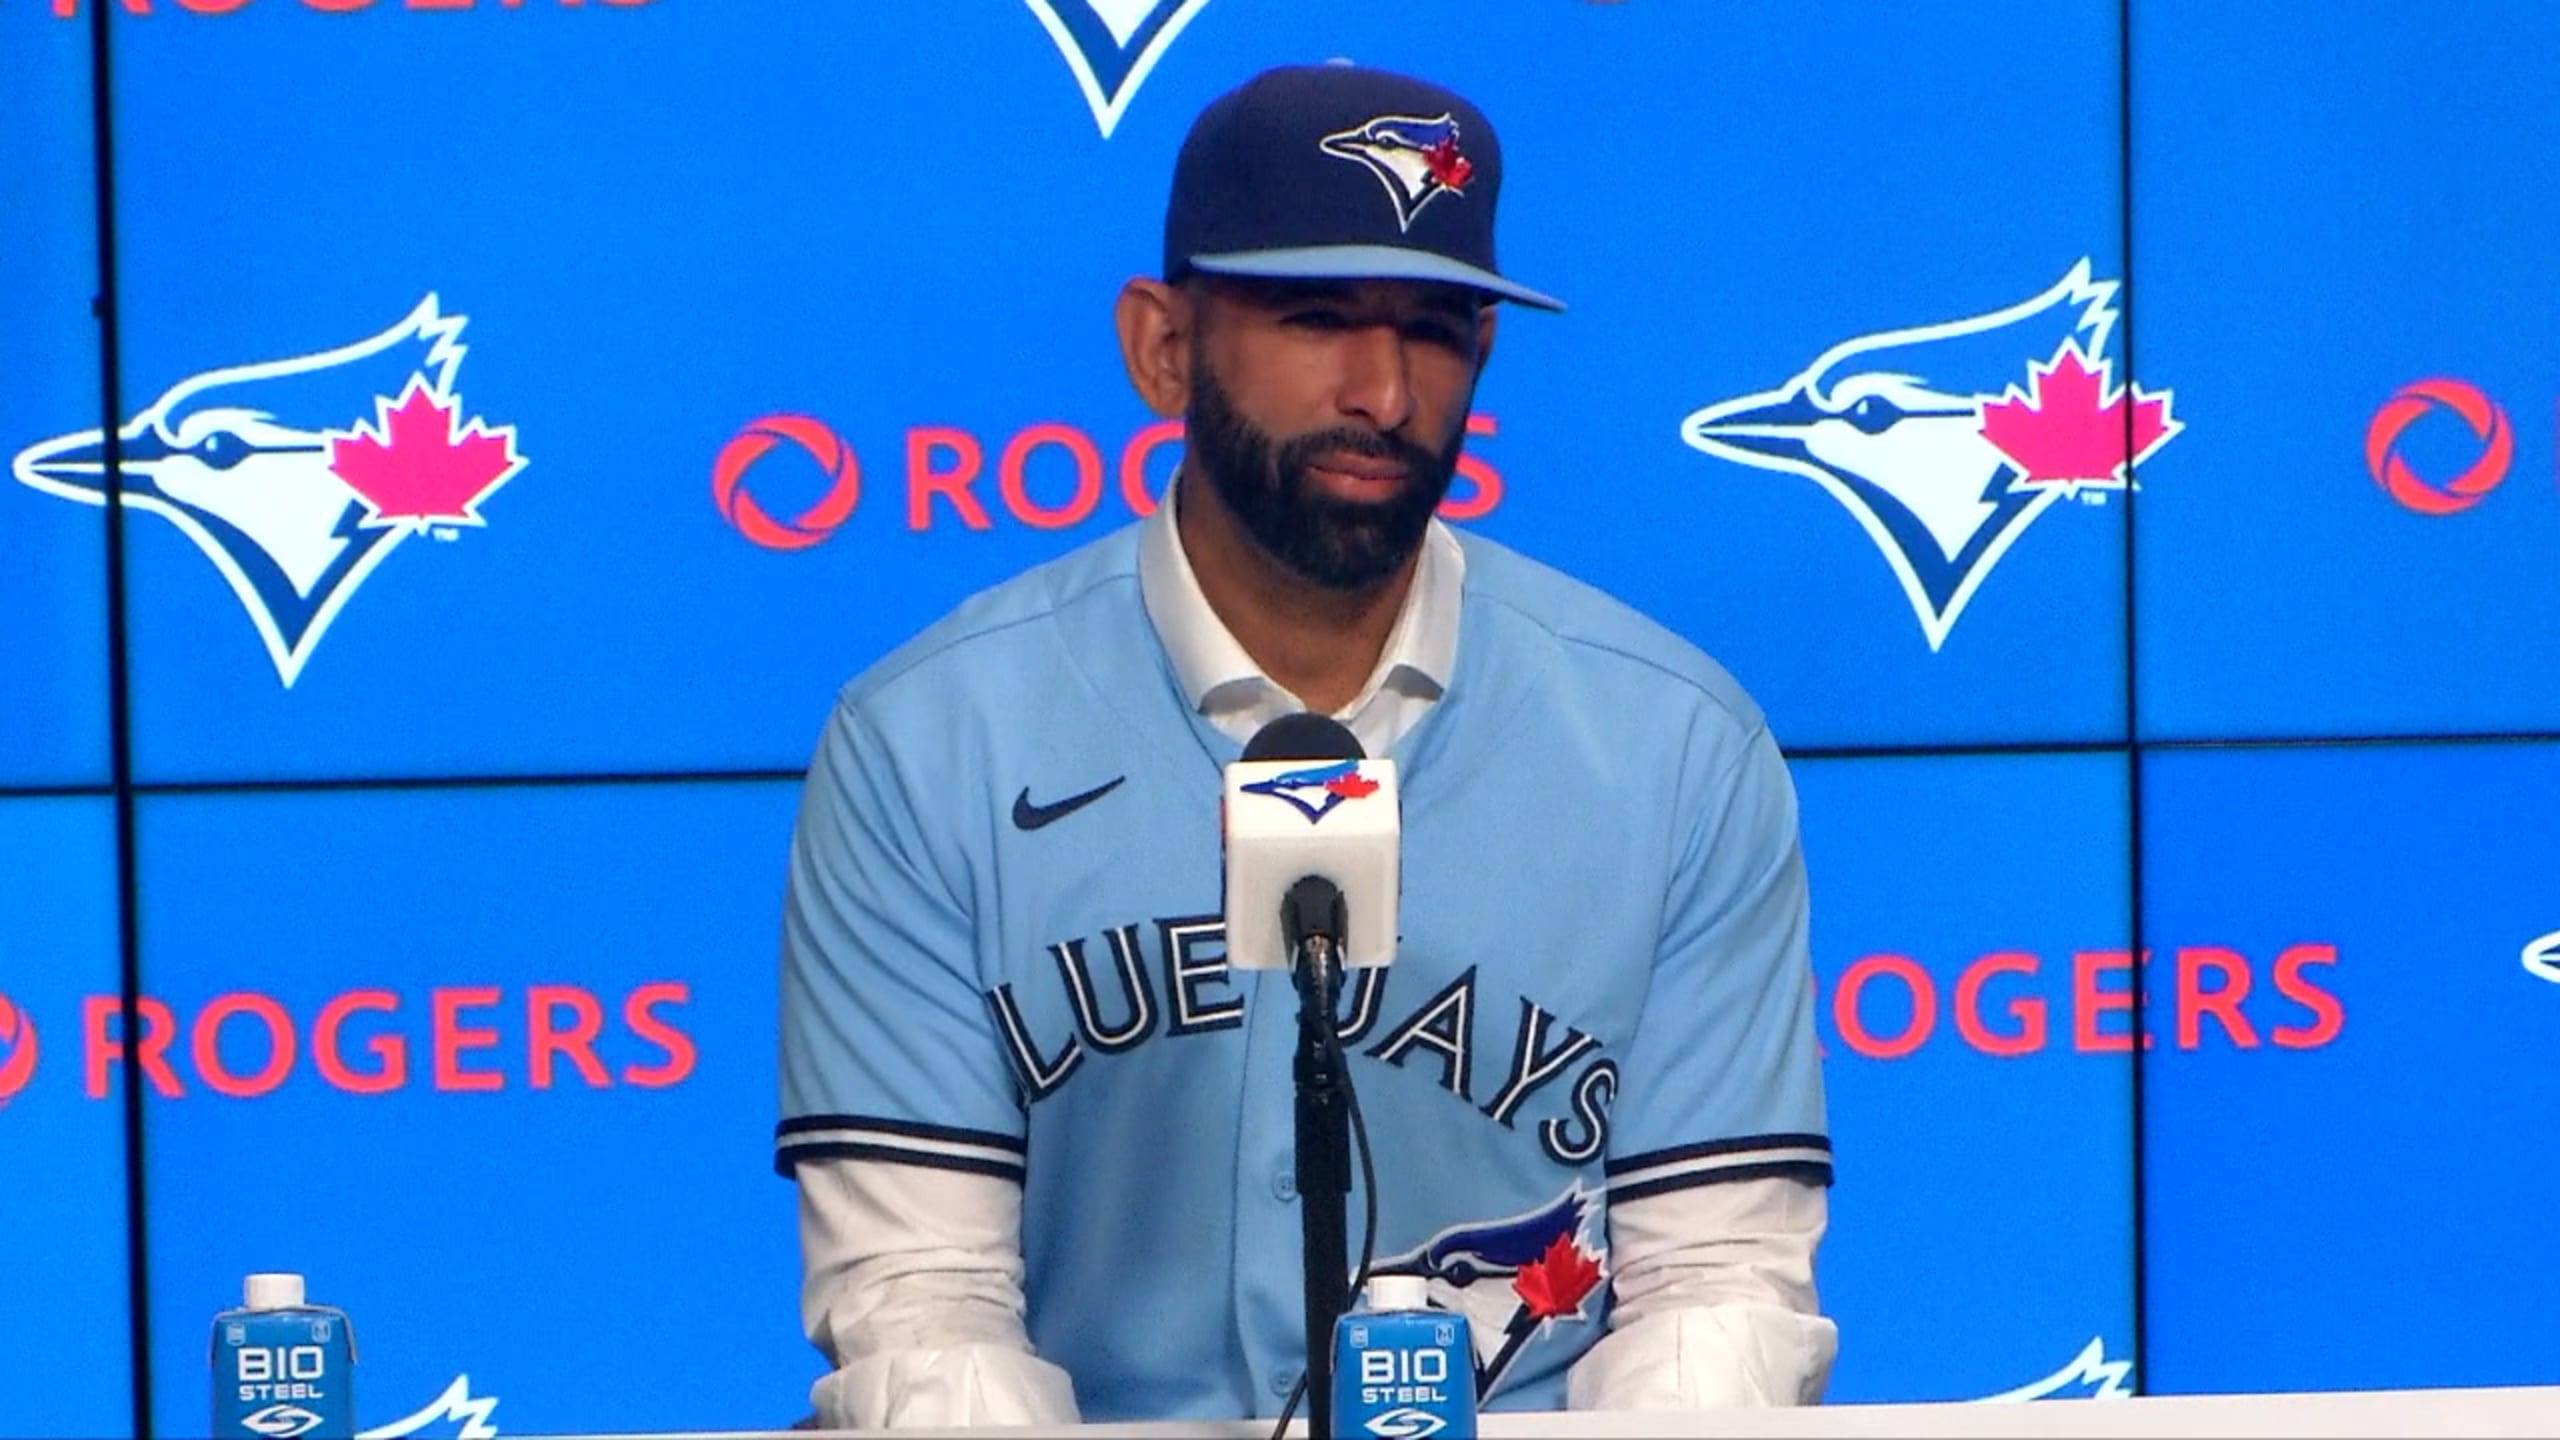 Blue Jays to honour José Bautista on their Level of Excellence